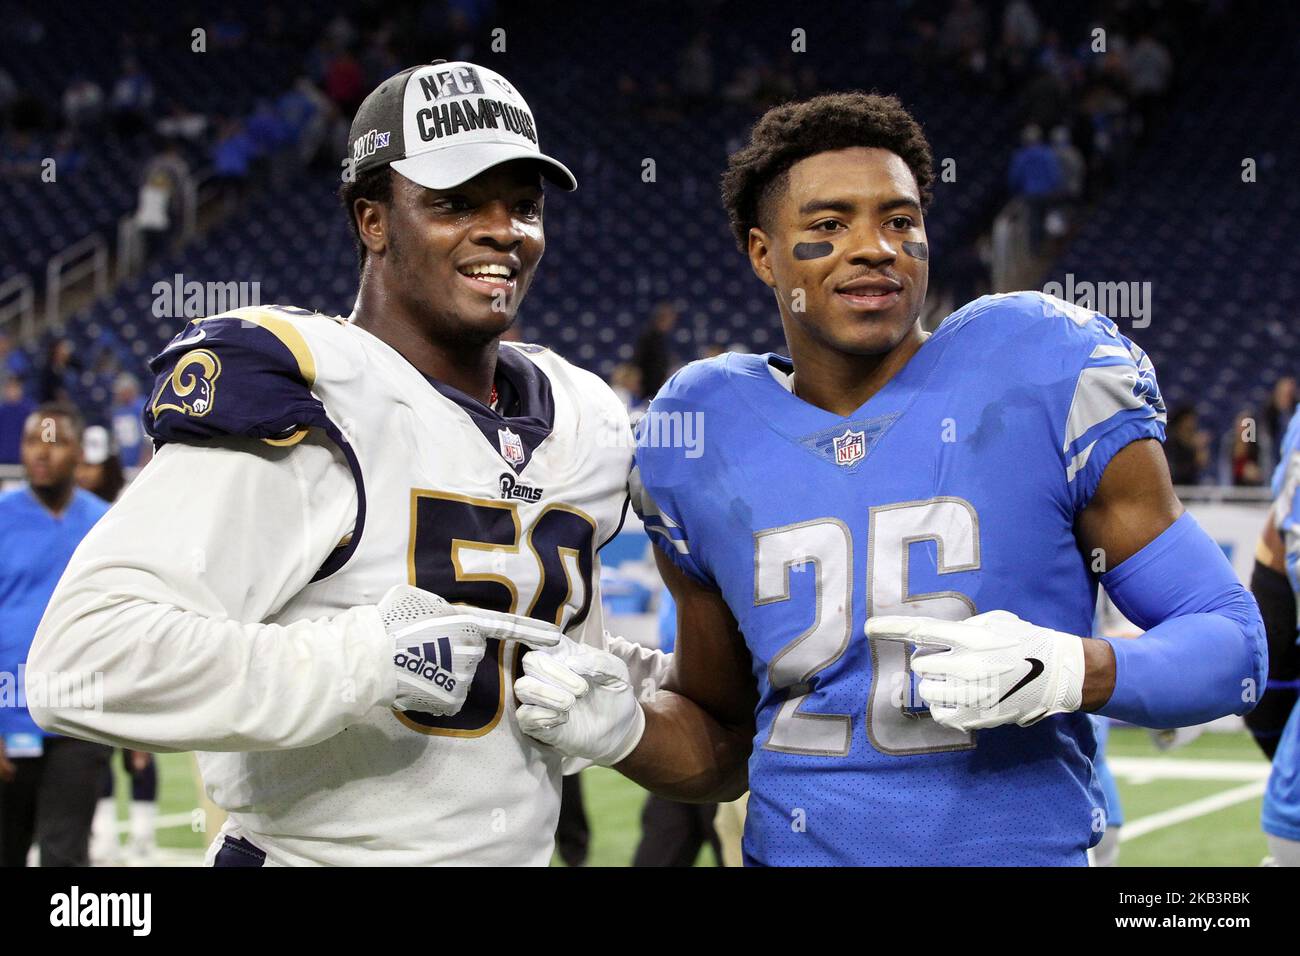 Detroit Lions defensive back DeShawn Shead (26) stands with Los Angeles Rams outside linebacker Samson Ebukam (50) who wears an NFC Champions hat after clinching the NFC championship with a win over the Detroit Lions after an NFL football game between the Los Angeles Rams and the Detroit Lions in Detroit, Michigan USA, on Sunday, December 2, 2018. (Photo by Amy Lemus/NurPhoto) Stock Photo